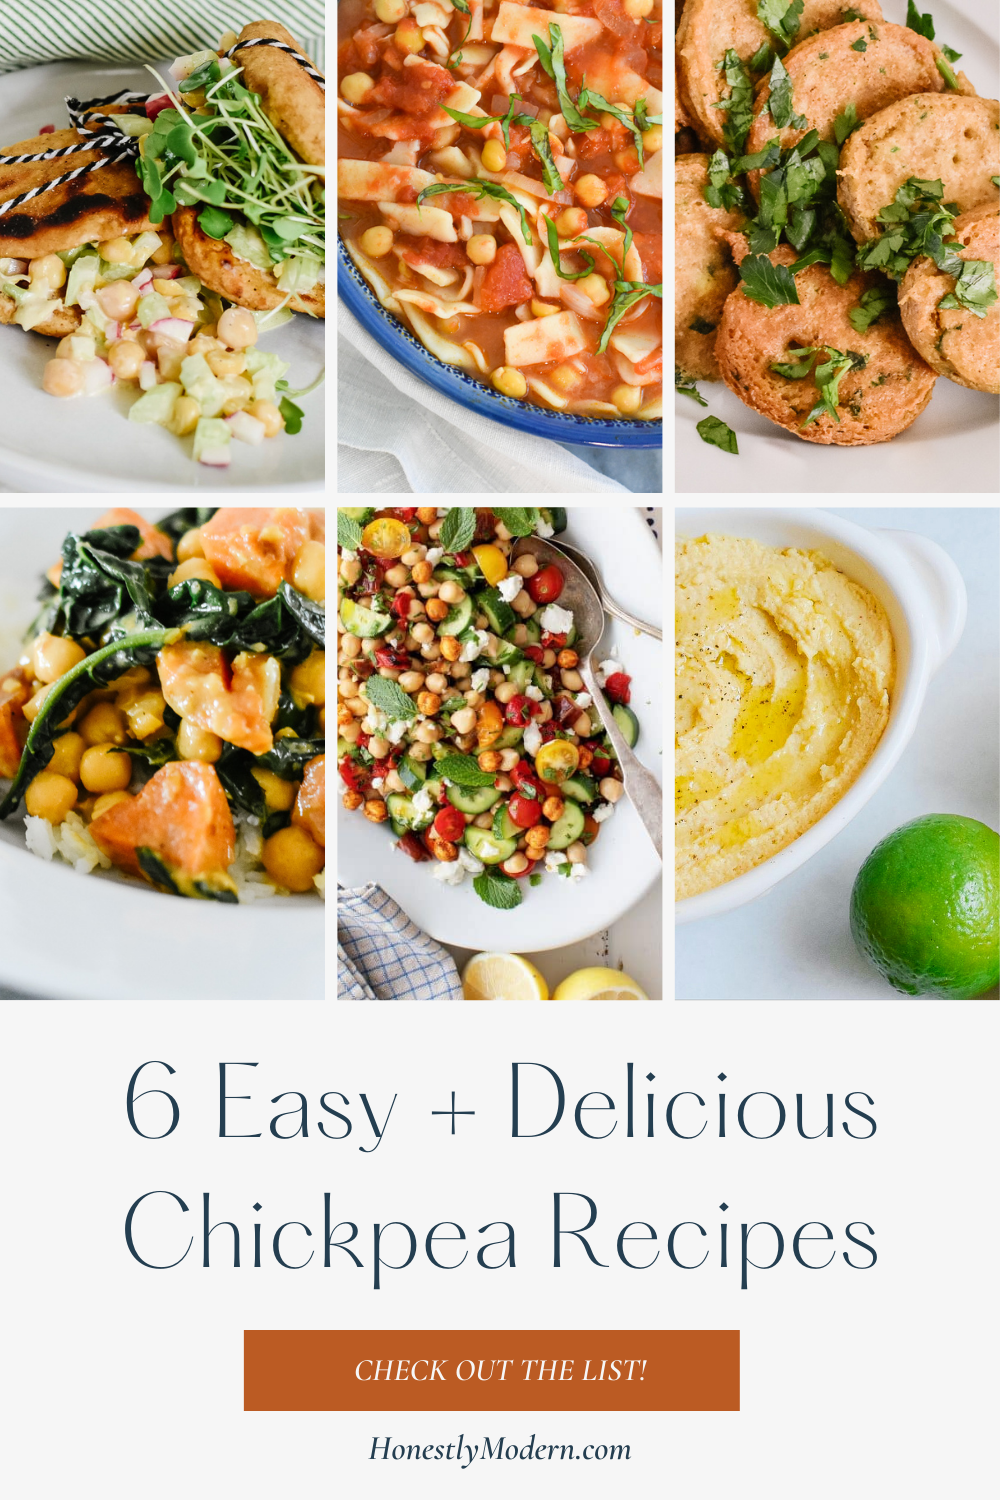 6 Easy + Delicious Chickpea Recipes For Plant-Based Beginners